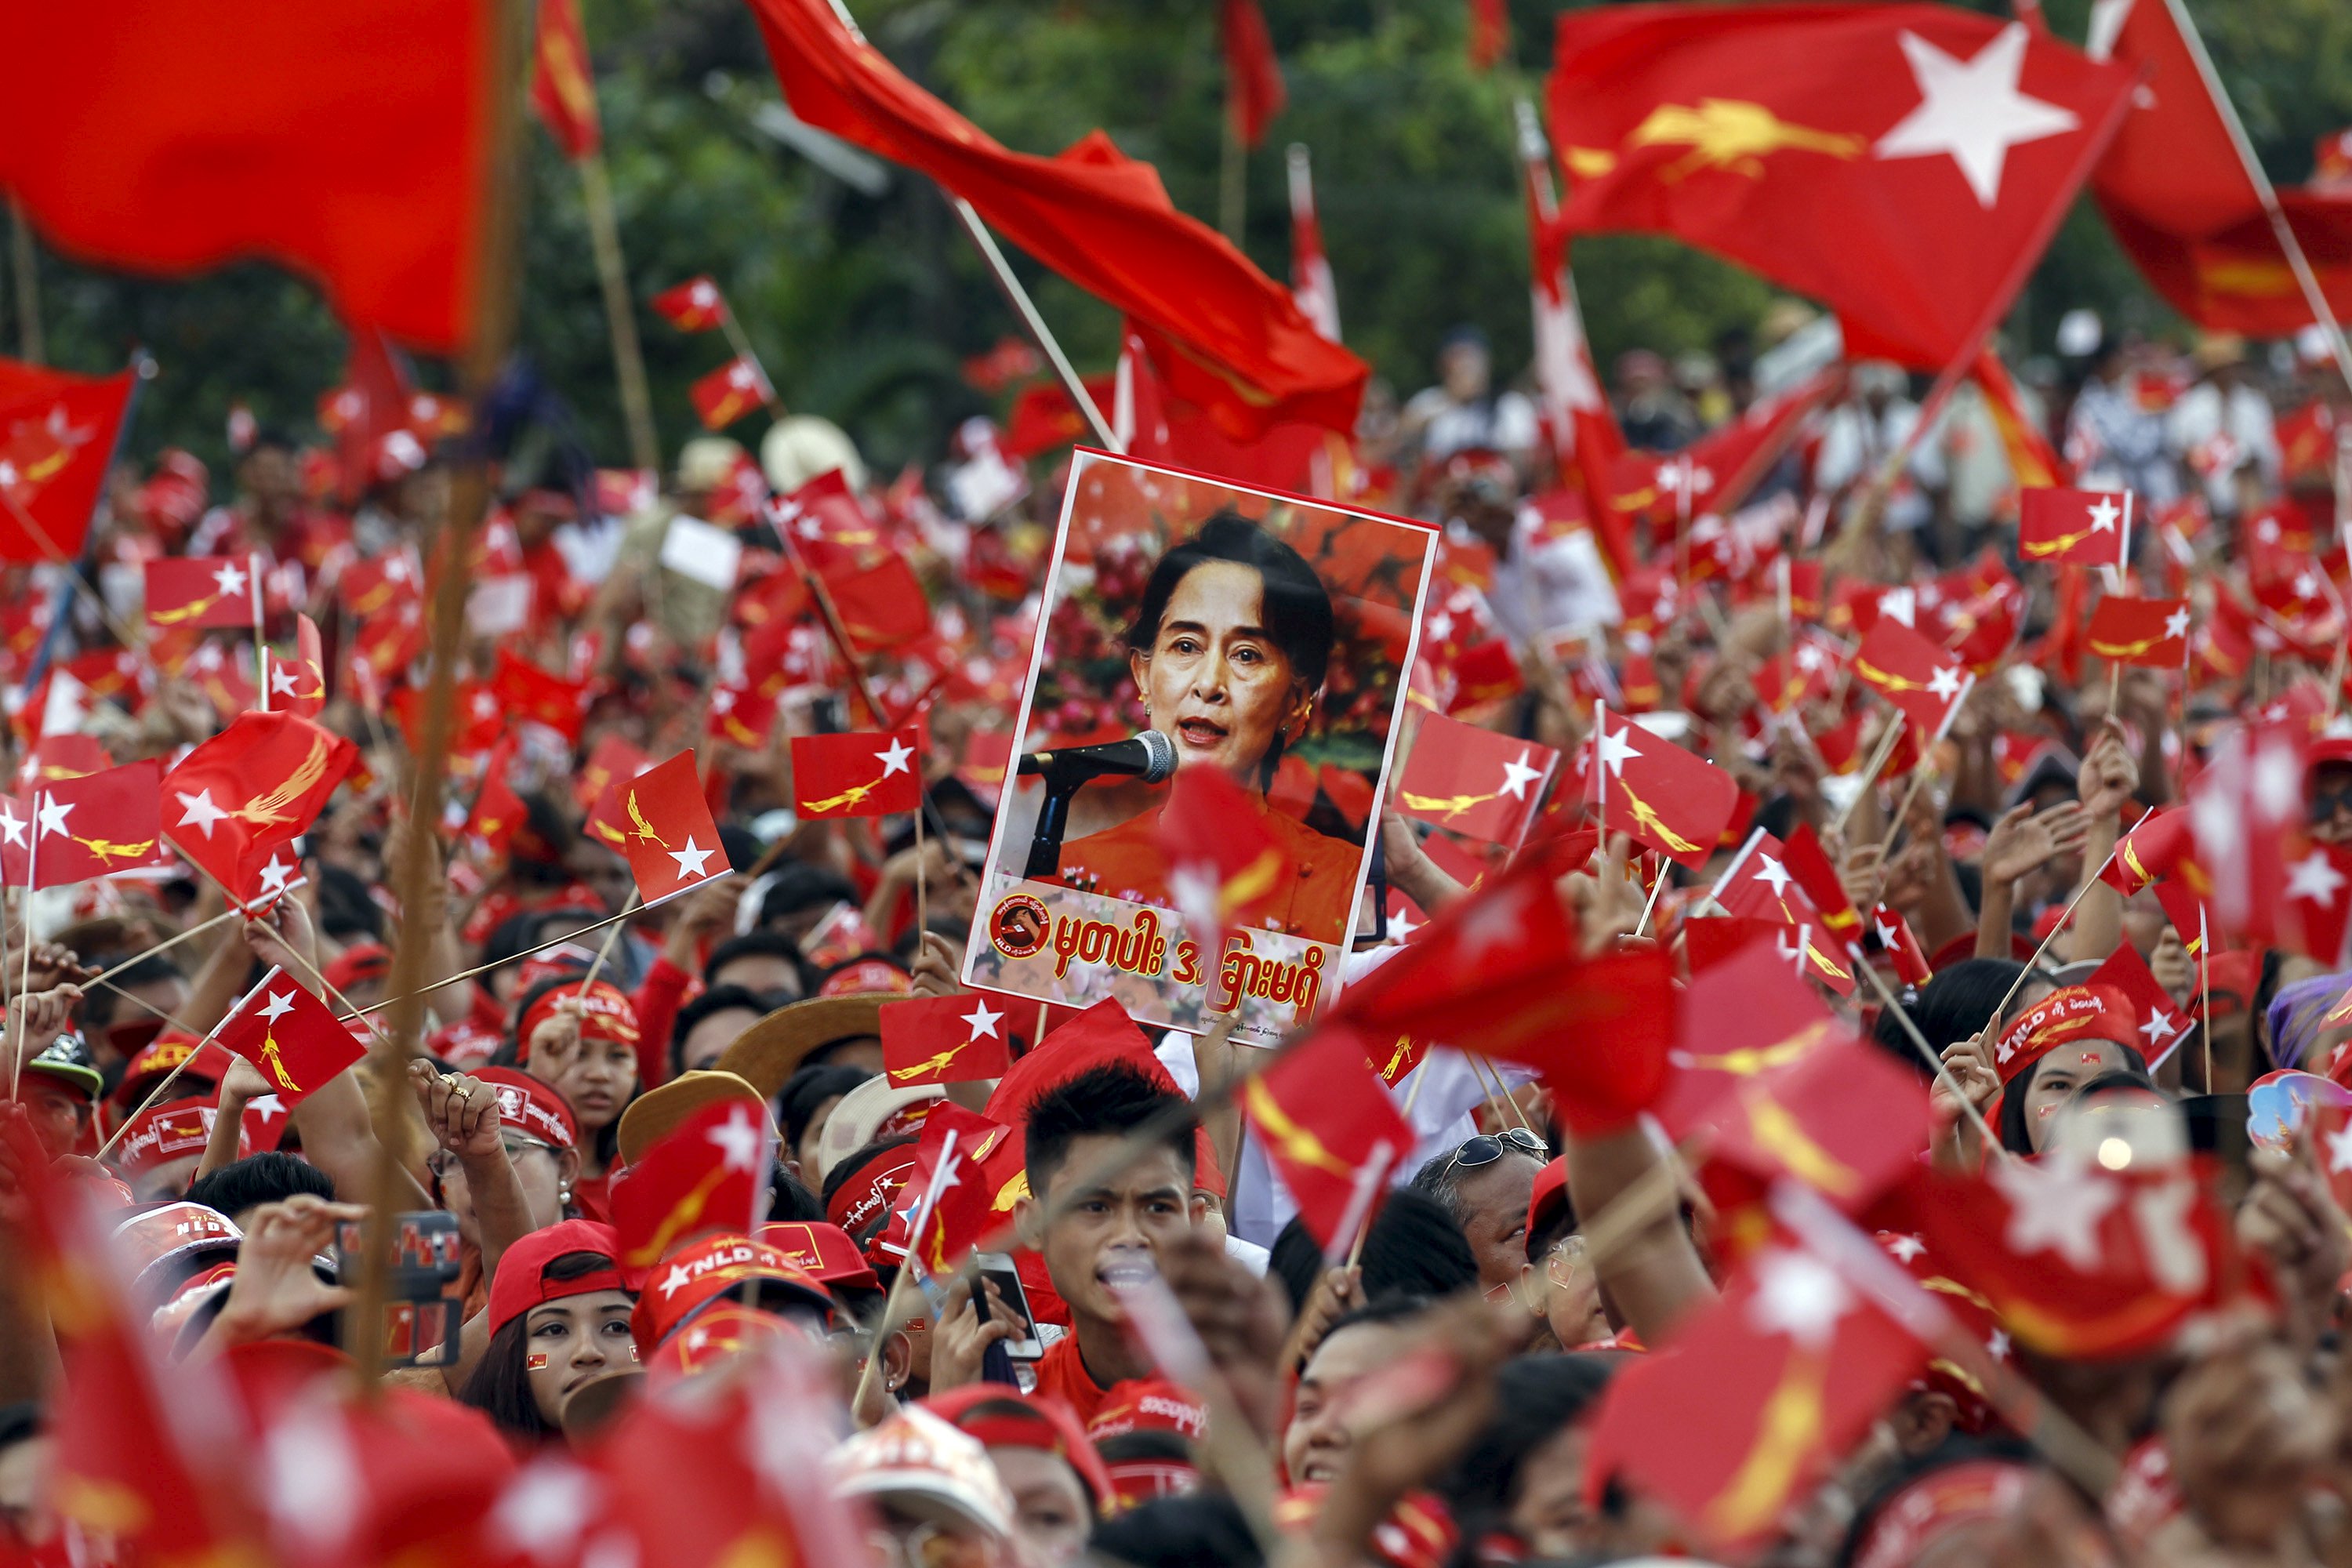 Supporters react as Myanmar pro-democracy leader Aung San Suu Kyi gives a speech at her campaign rally for the upcoming general elections in Yangon Sunday.